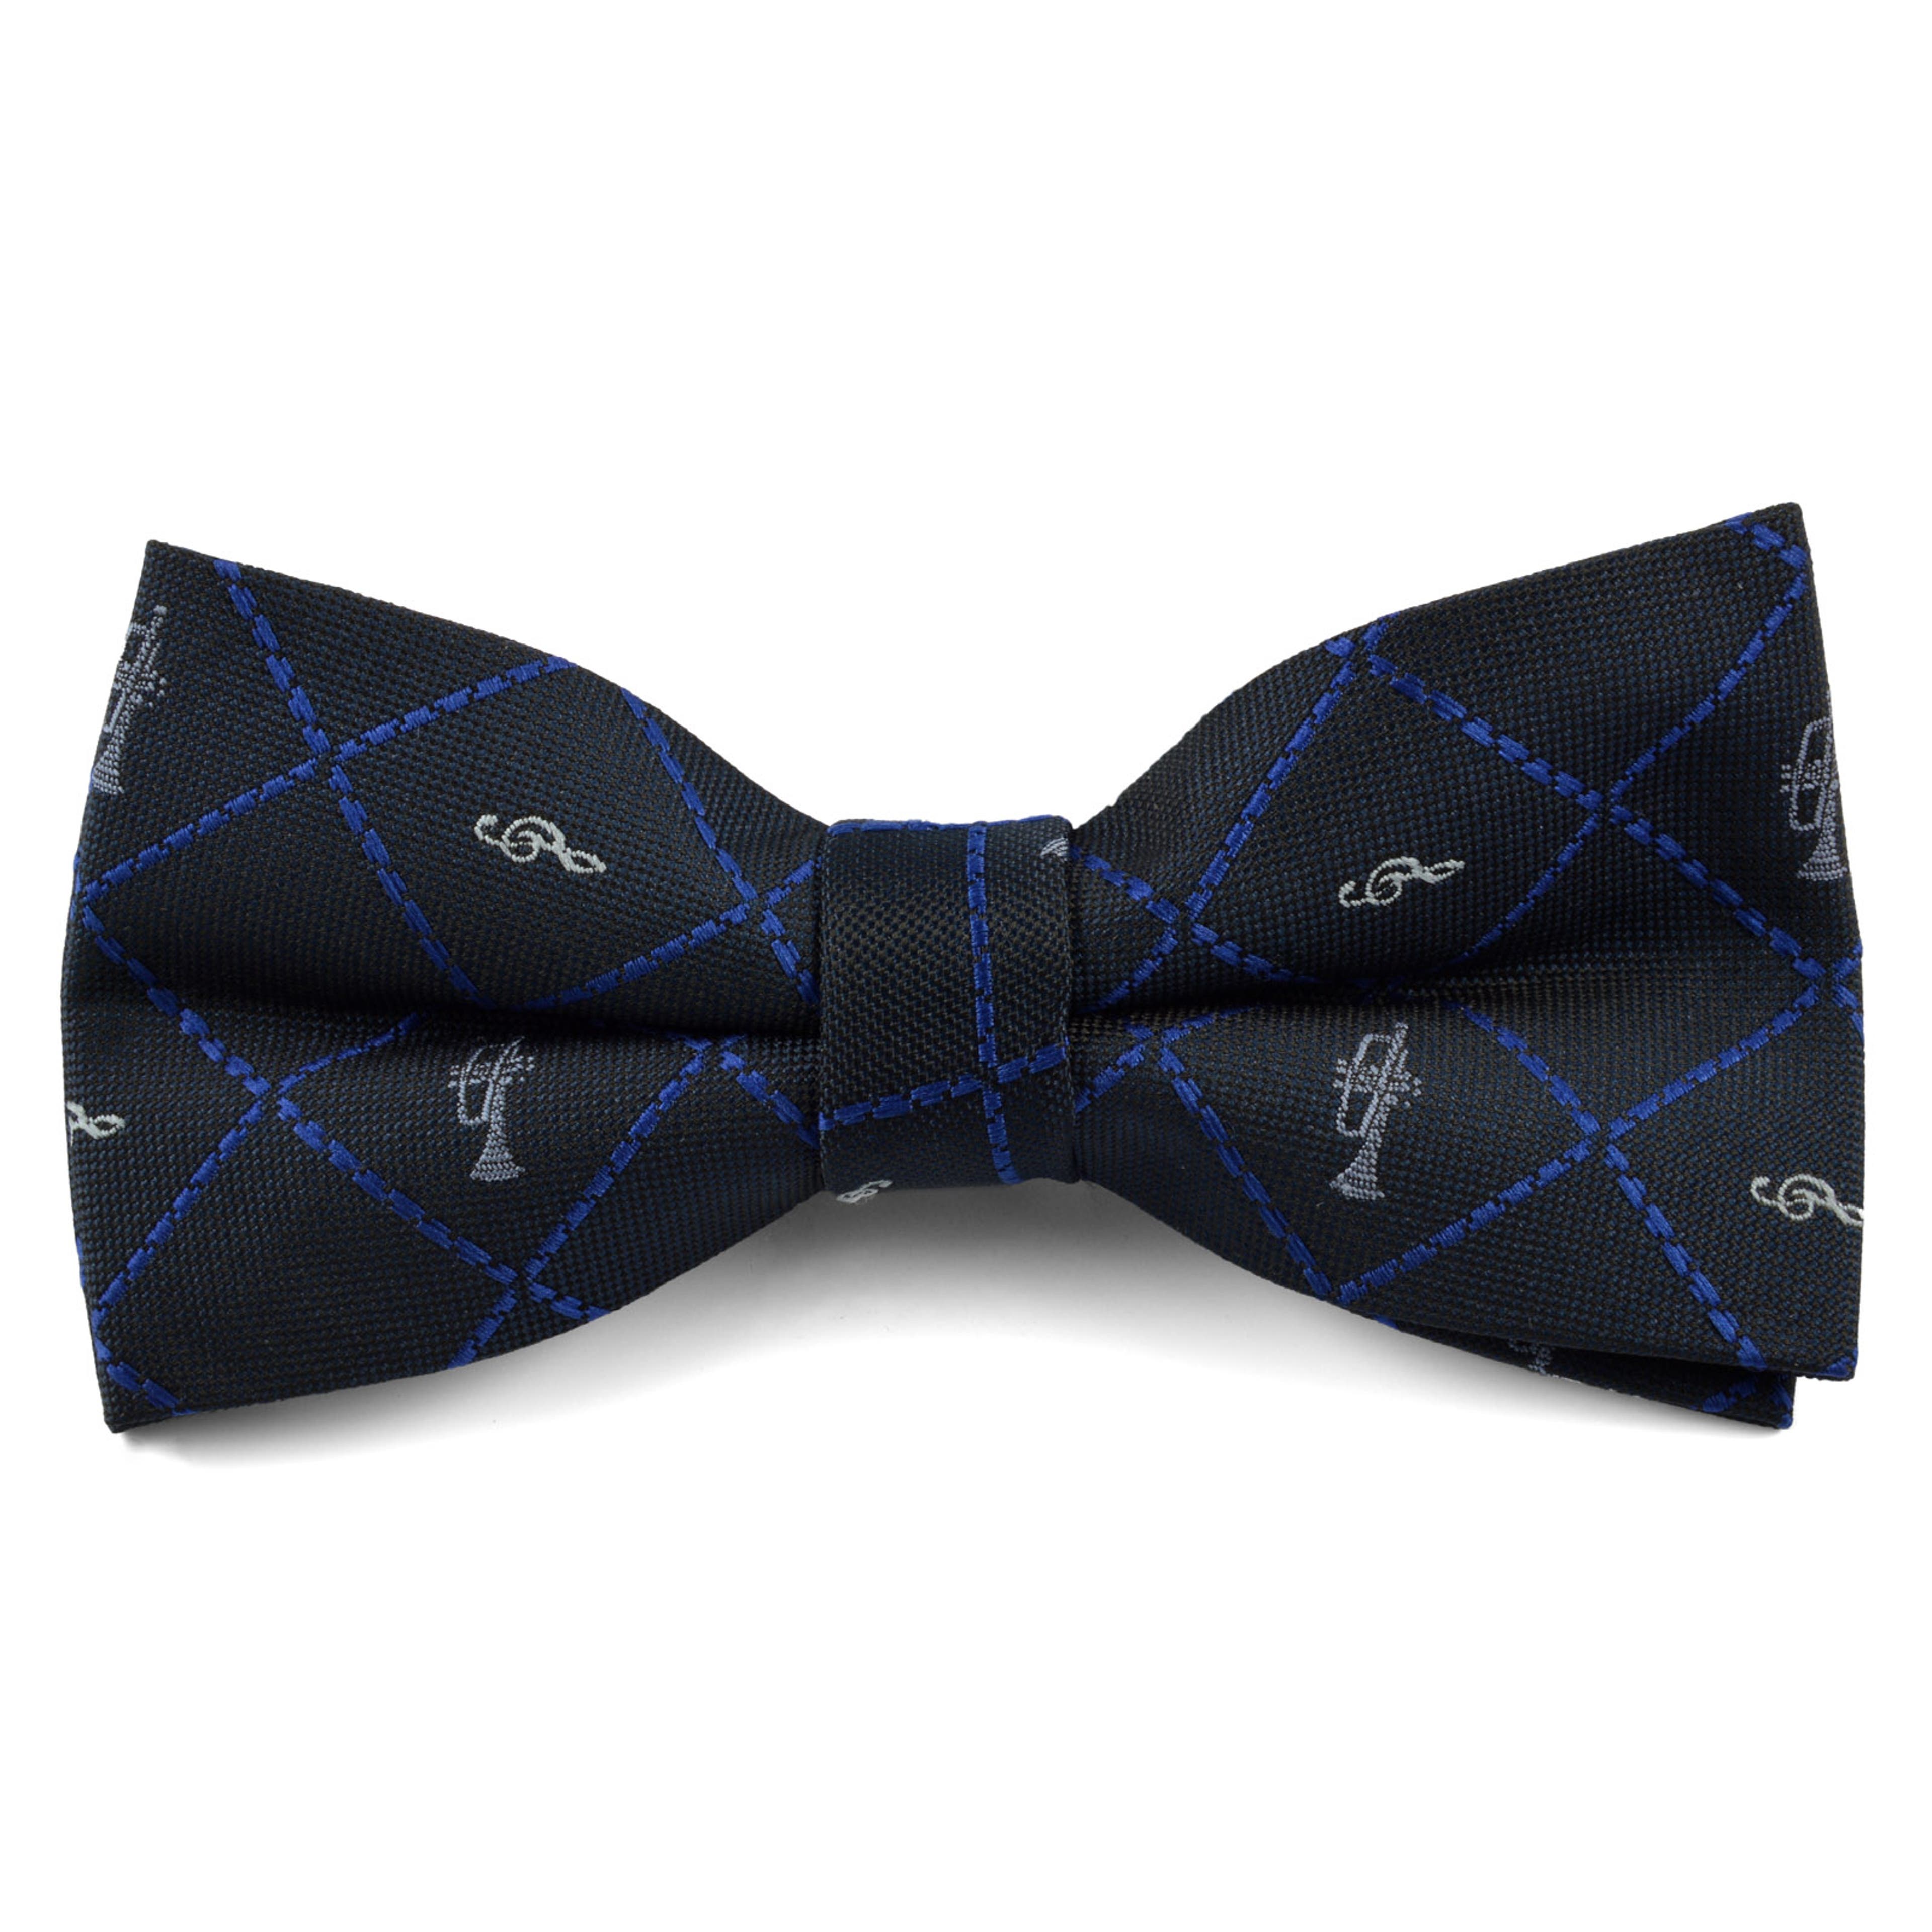 Black & Royal Blue Chequered Pre-Tied Bow Tie